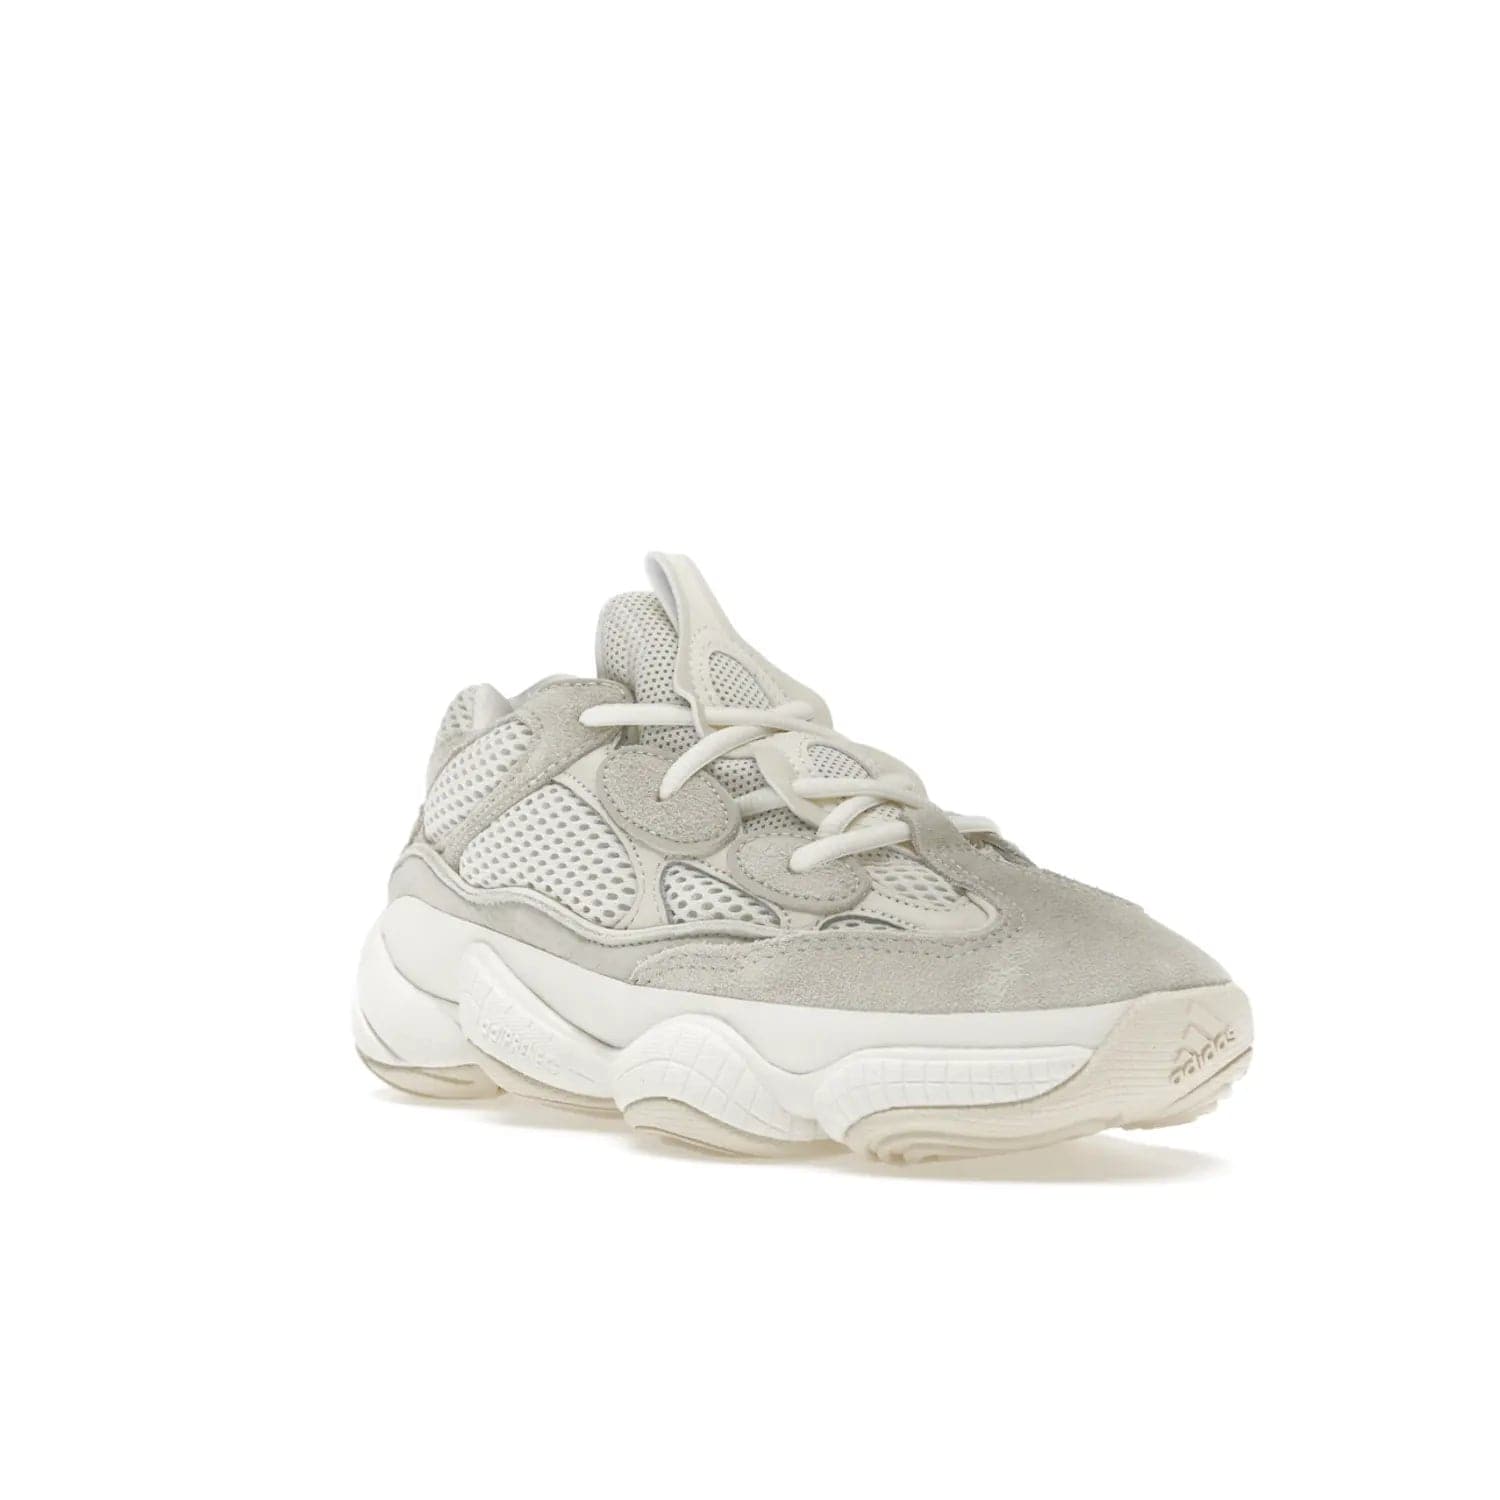 adidas Yeezy 500 Bone White (2023) - Image 6 - Only at www.BallersClubKickz.com - Experience the unique style of the adidas Yeezy 500 Bone White. Featuring a Bone White colorway and white accents, durable construction and comfortably light feel. Get ready to make a statement in 2023.